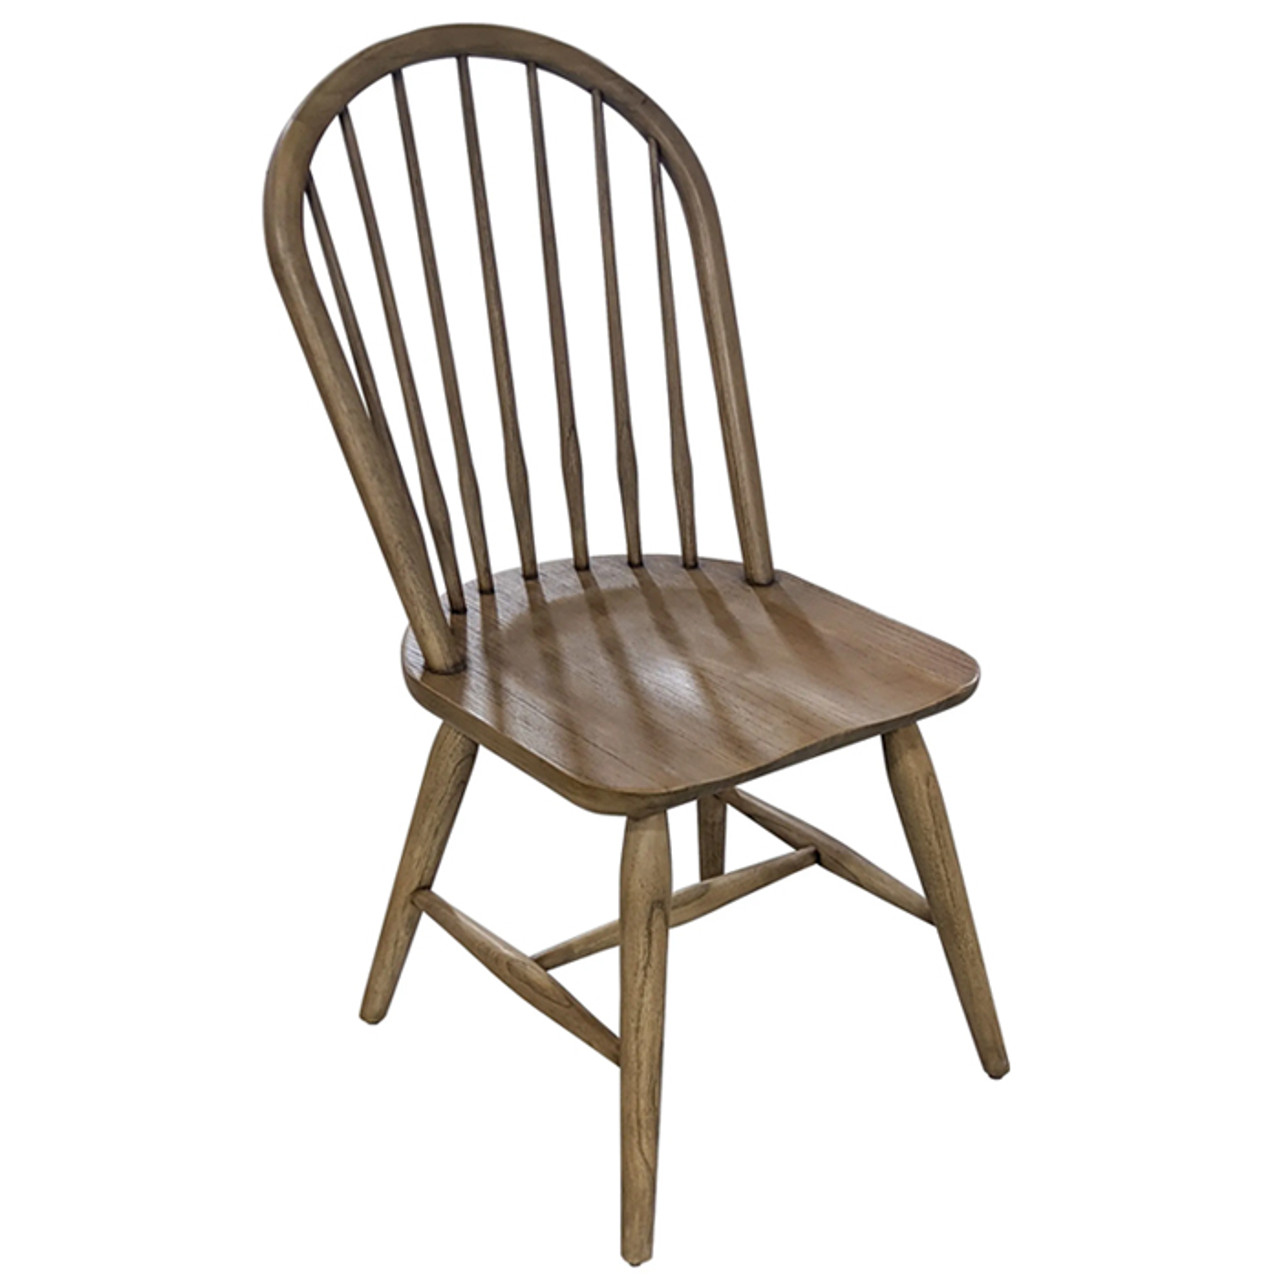 Selene Spindle Back Dining Chair – Rustic Brown